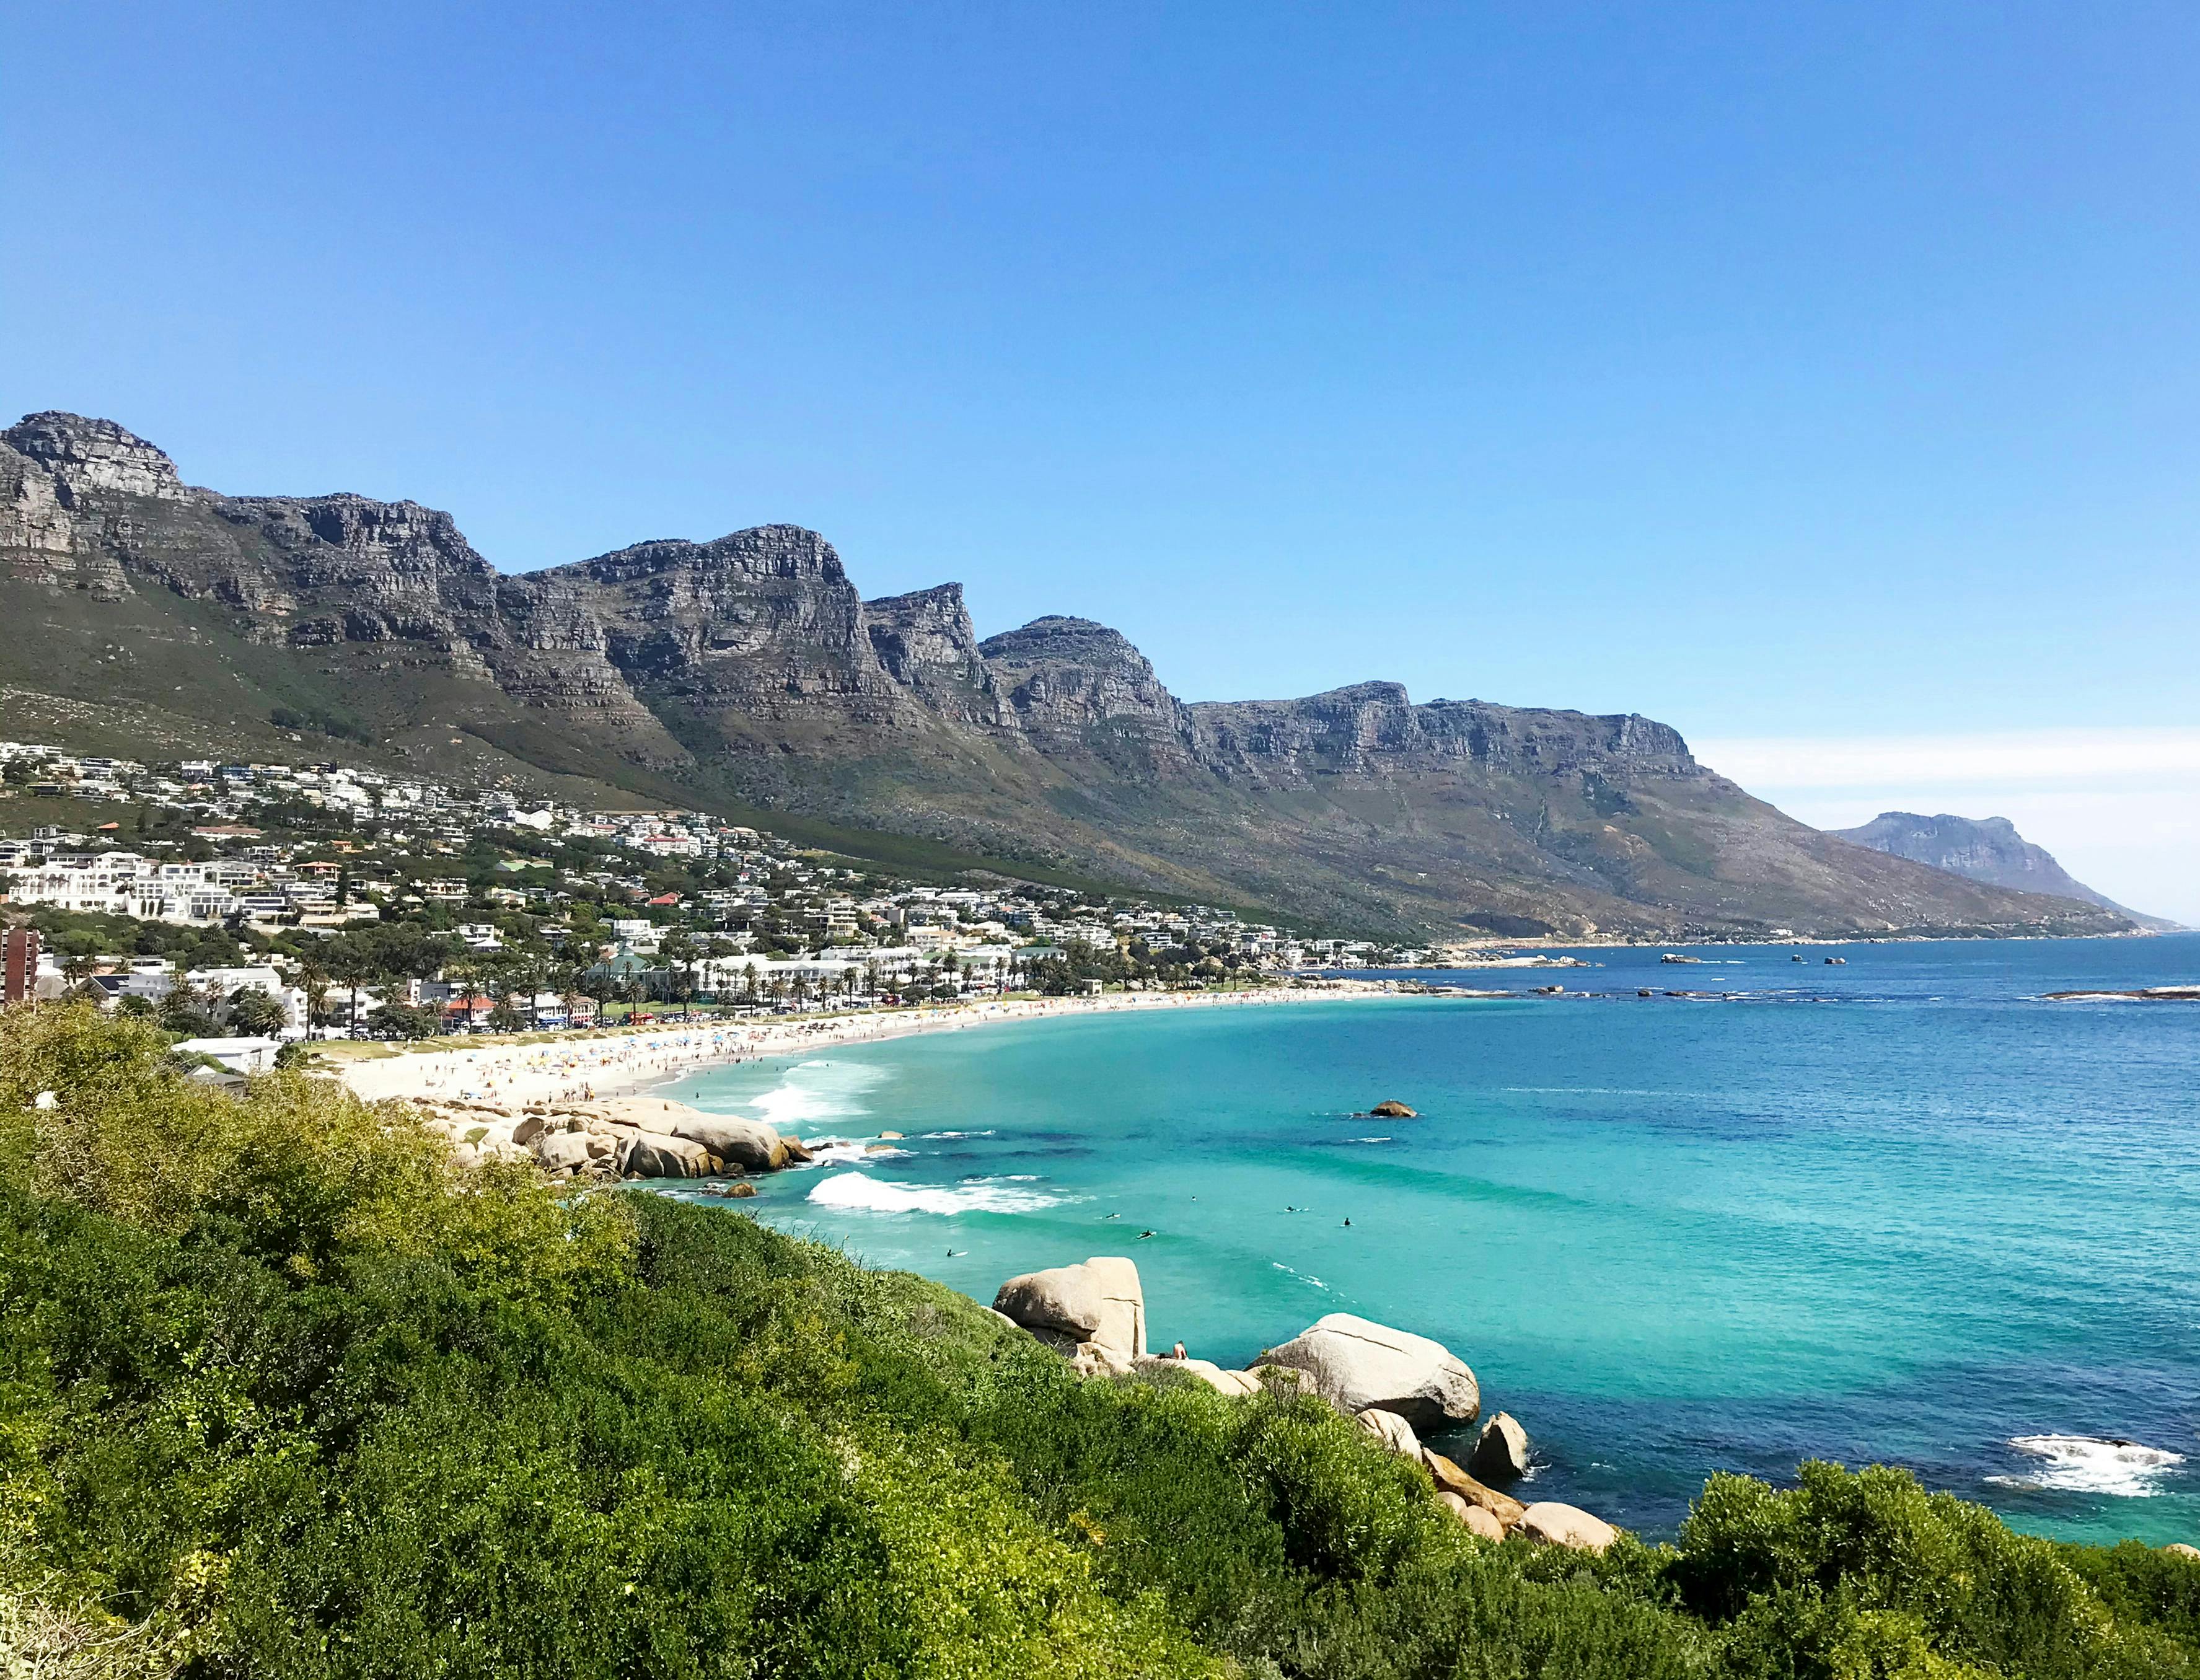 South Africa - Traveler view, Travelers' Health